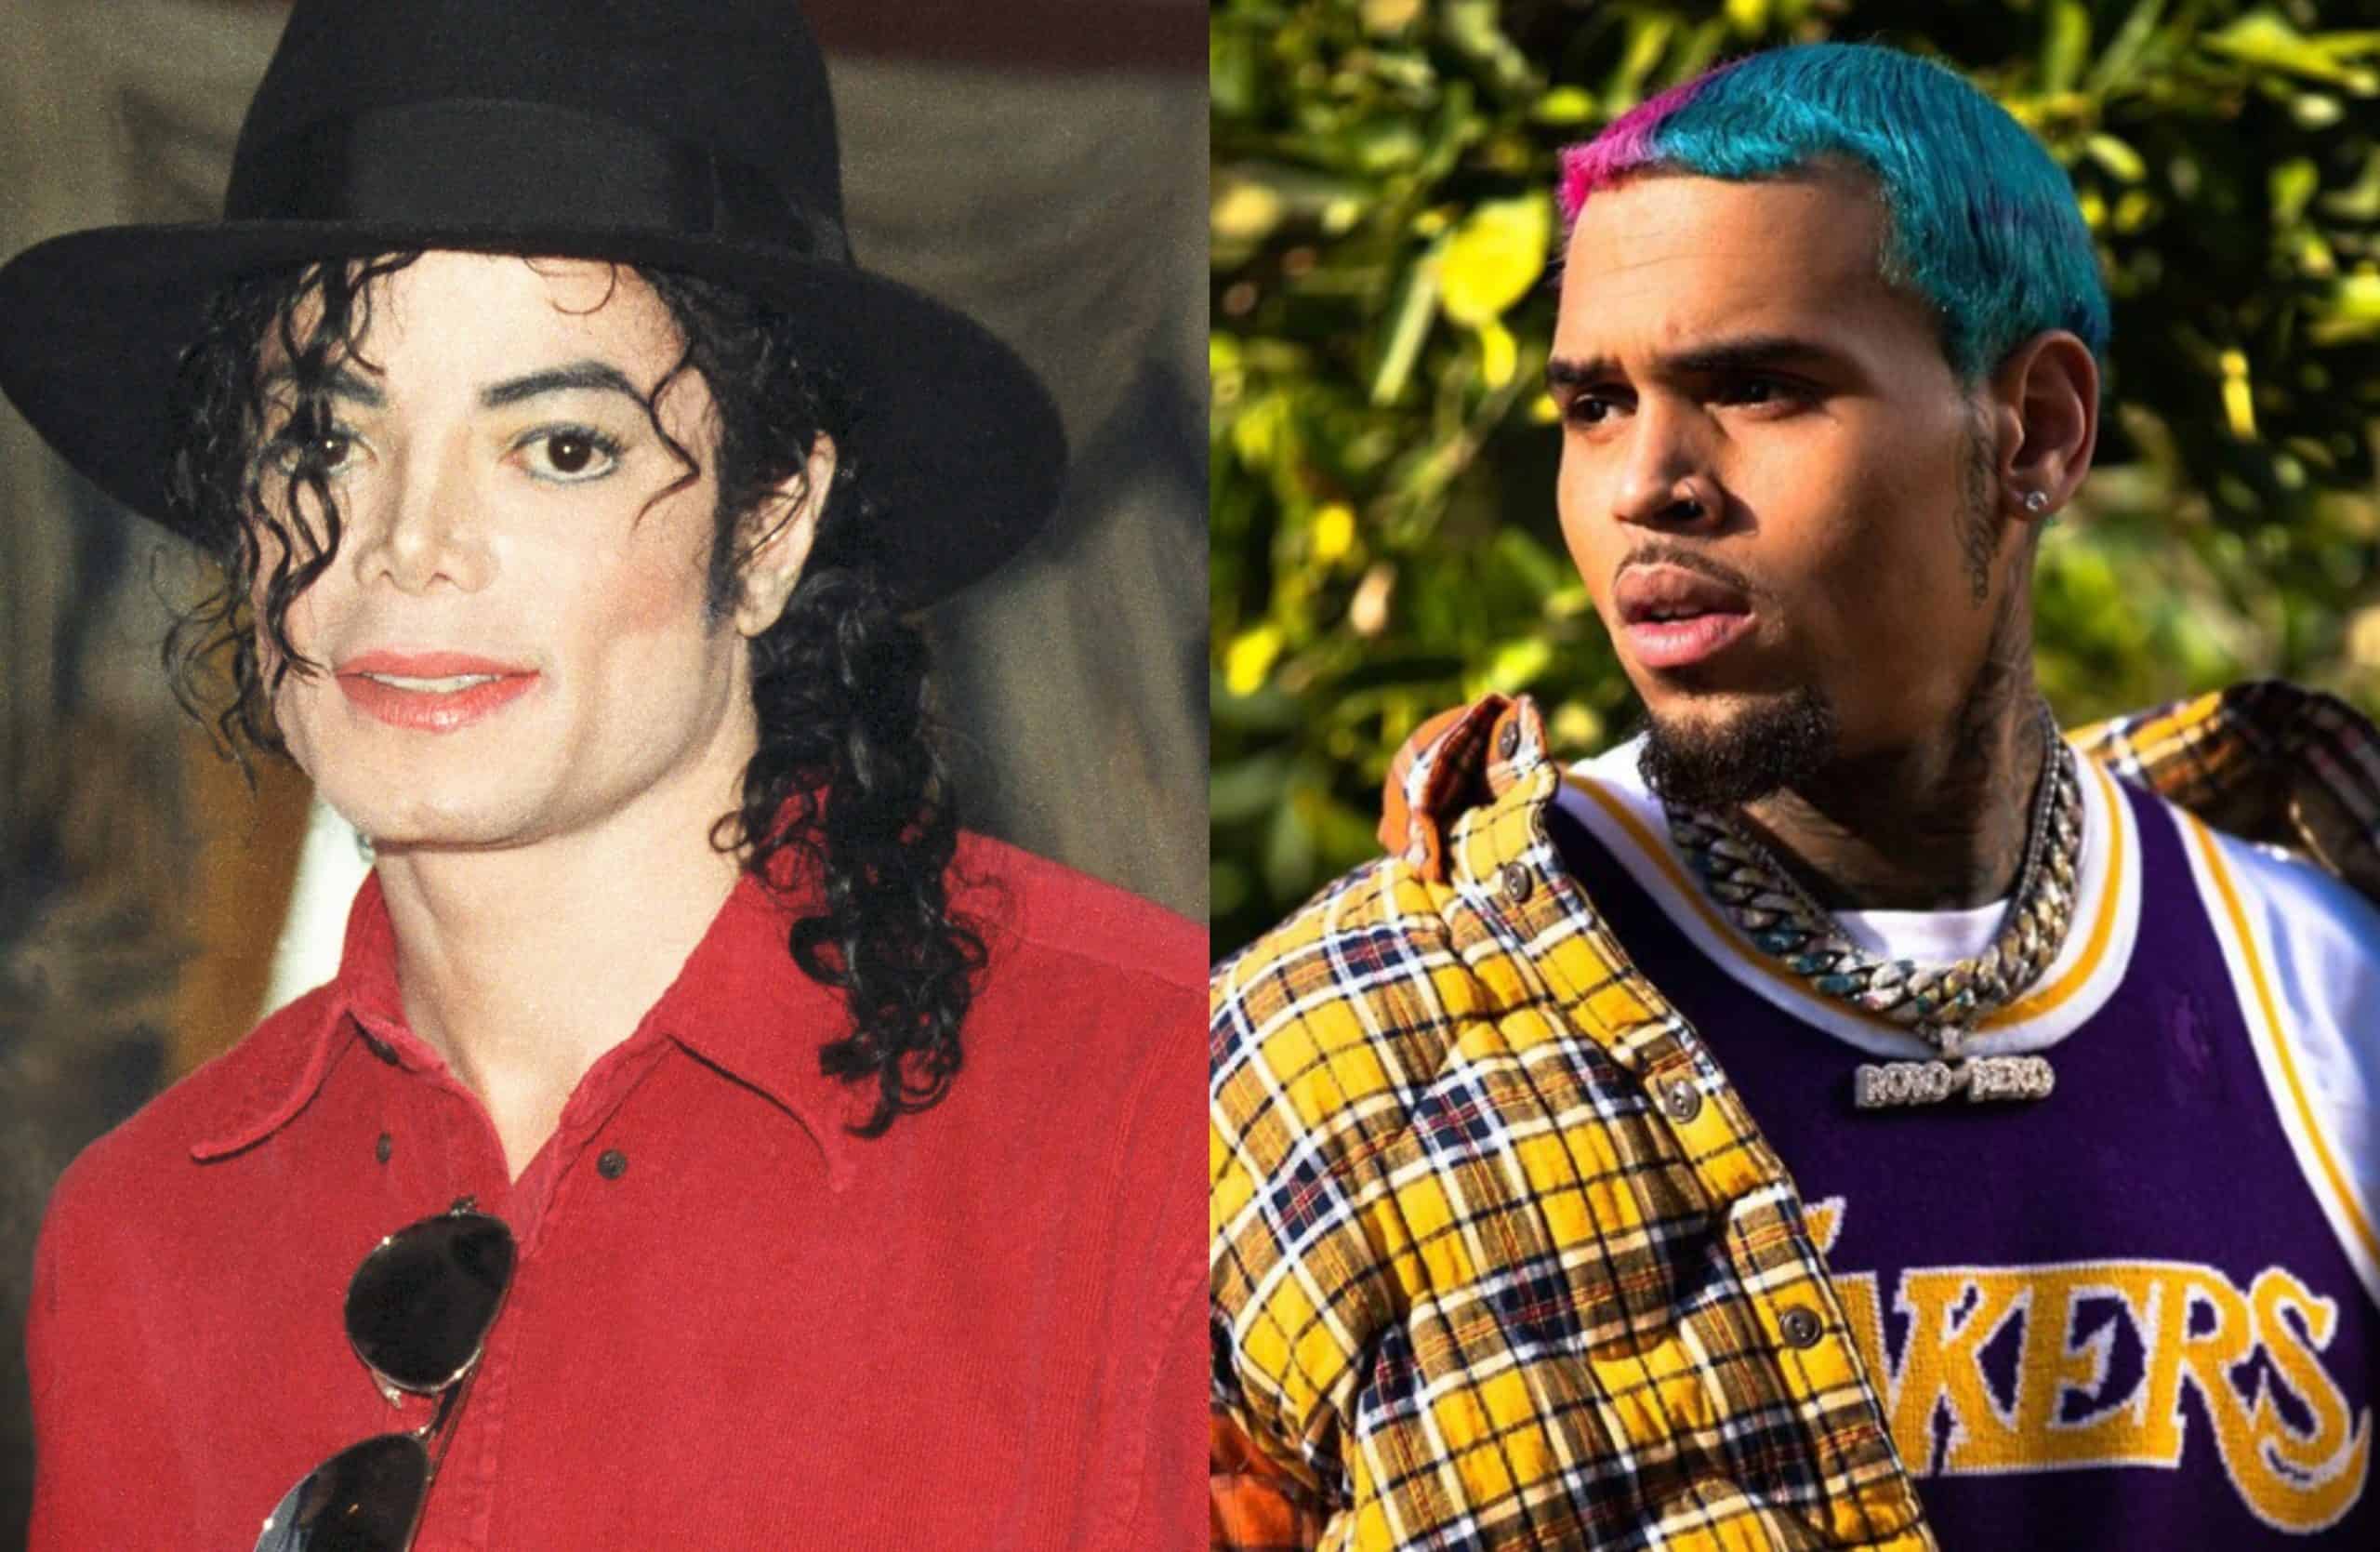 Casanova declares the Chris Brown is better than Micheal Jackson from prison